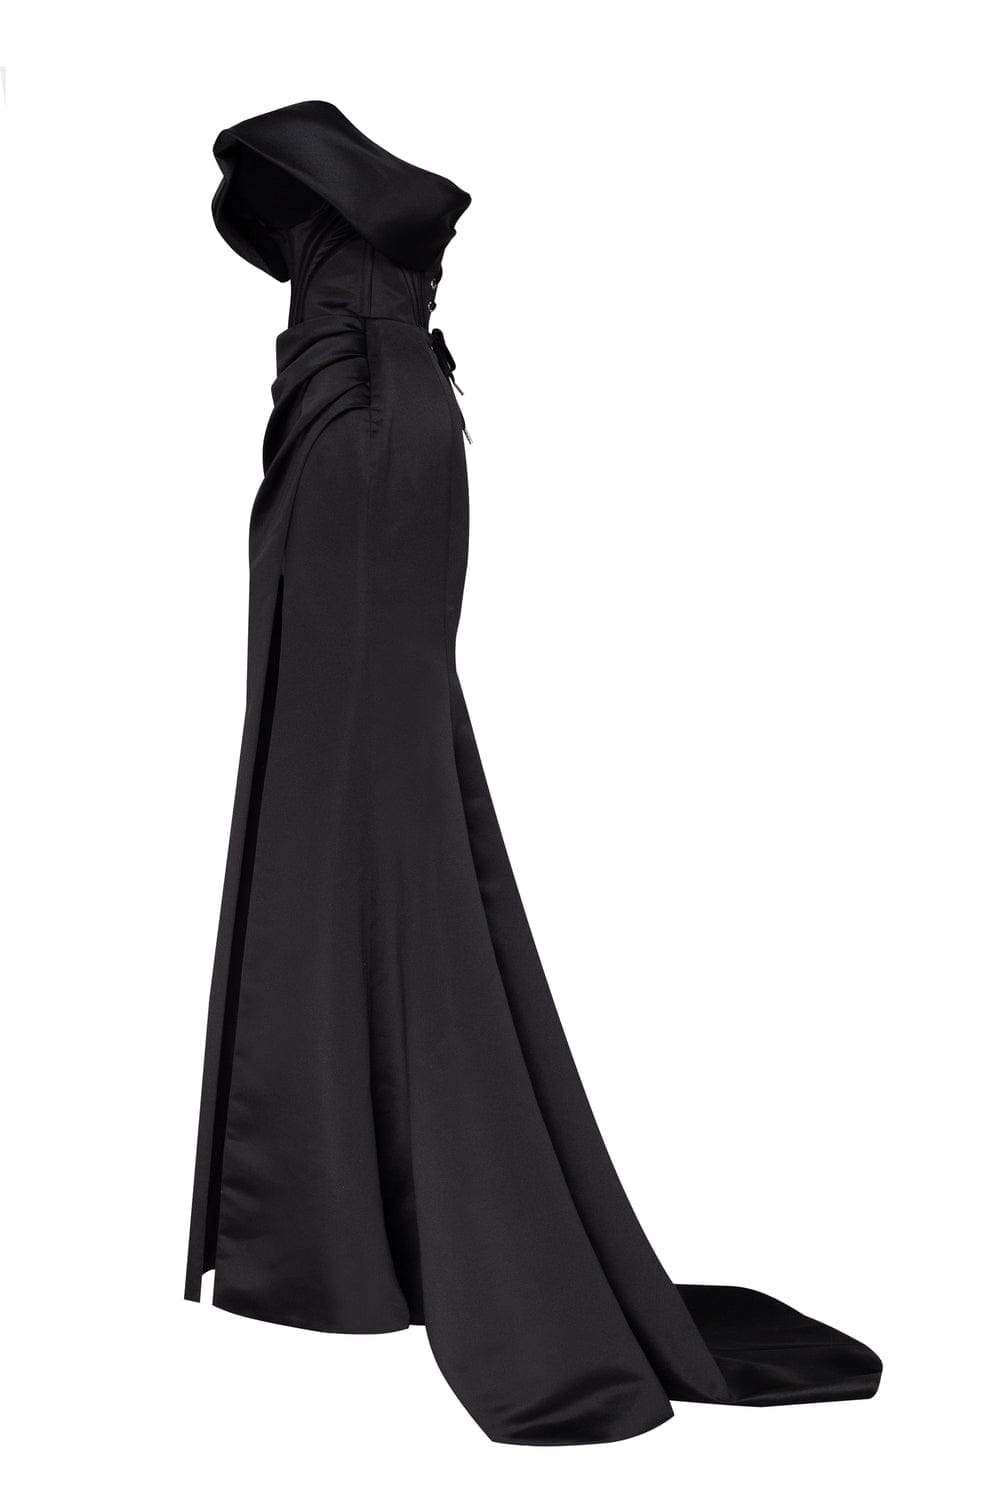 Black Princess strapless gown with thigh slit - Milla